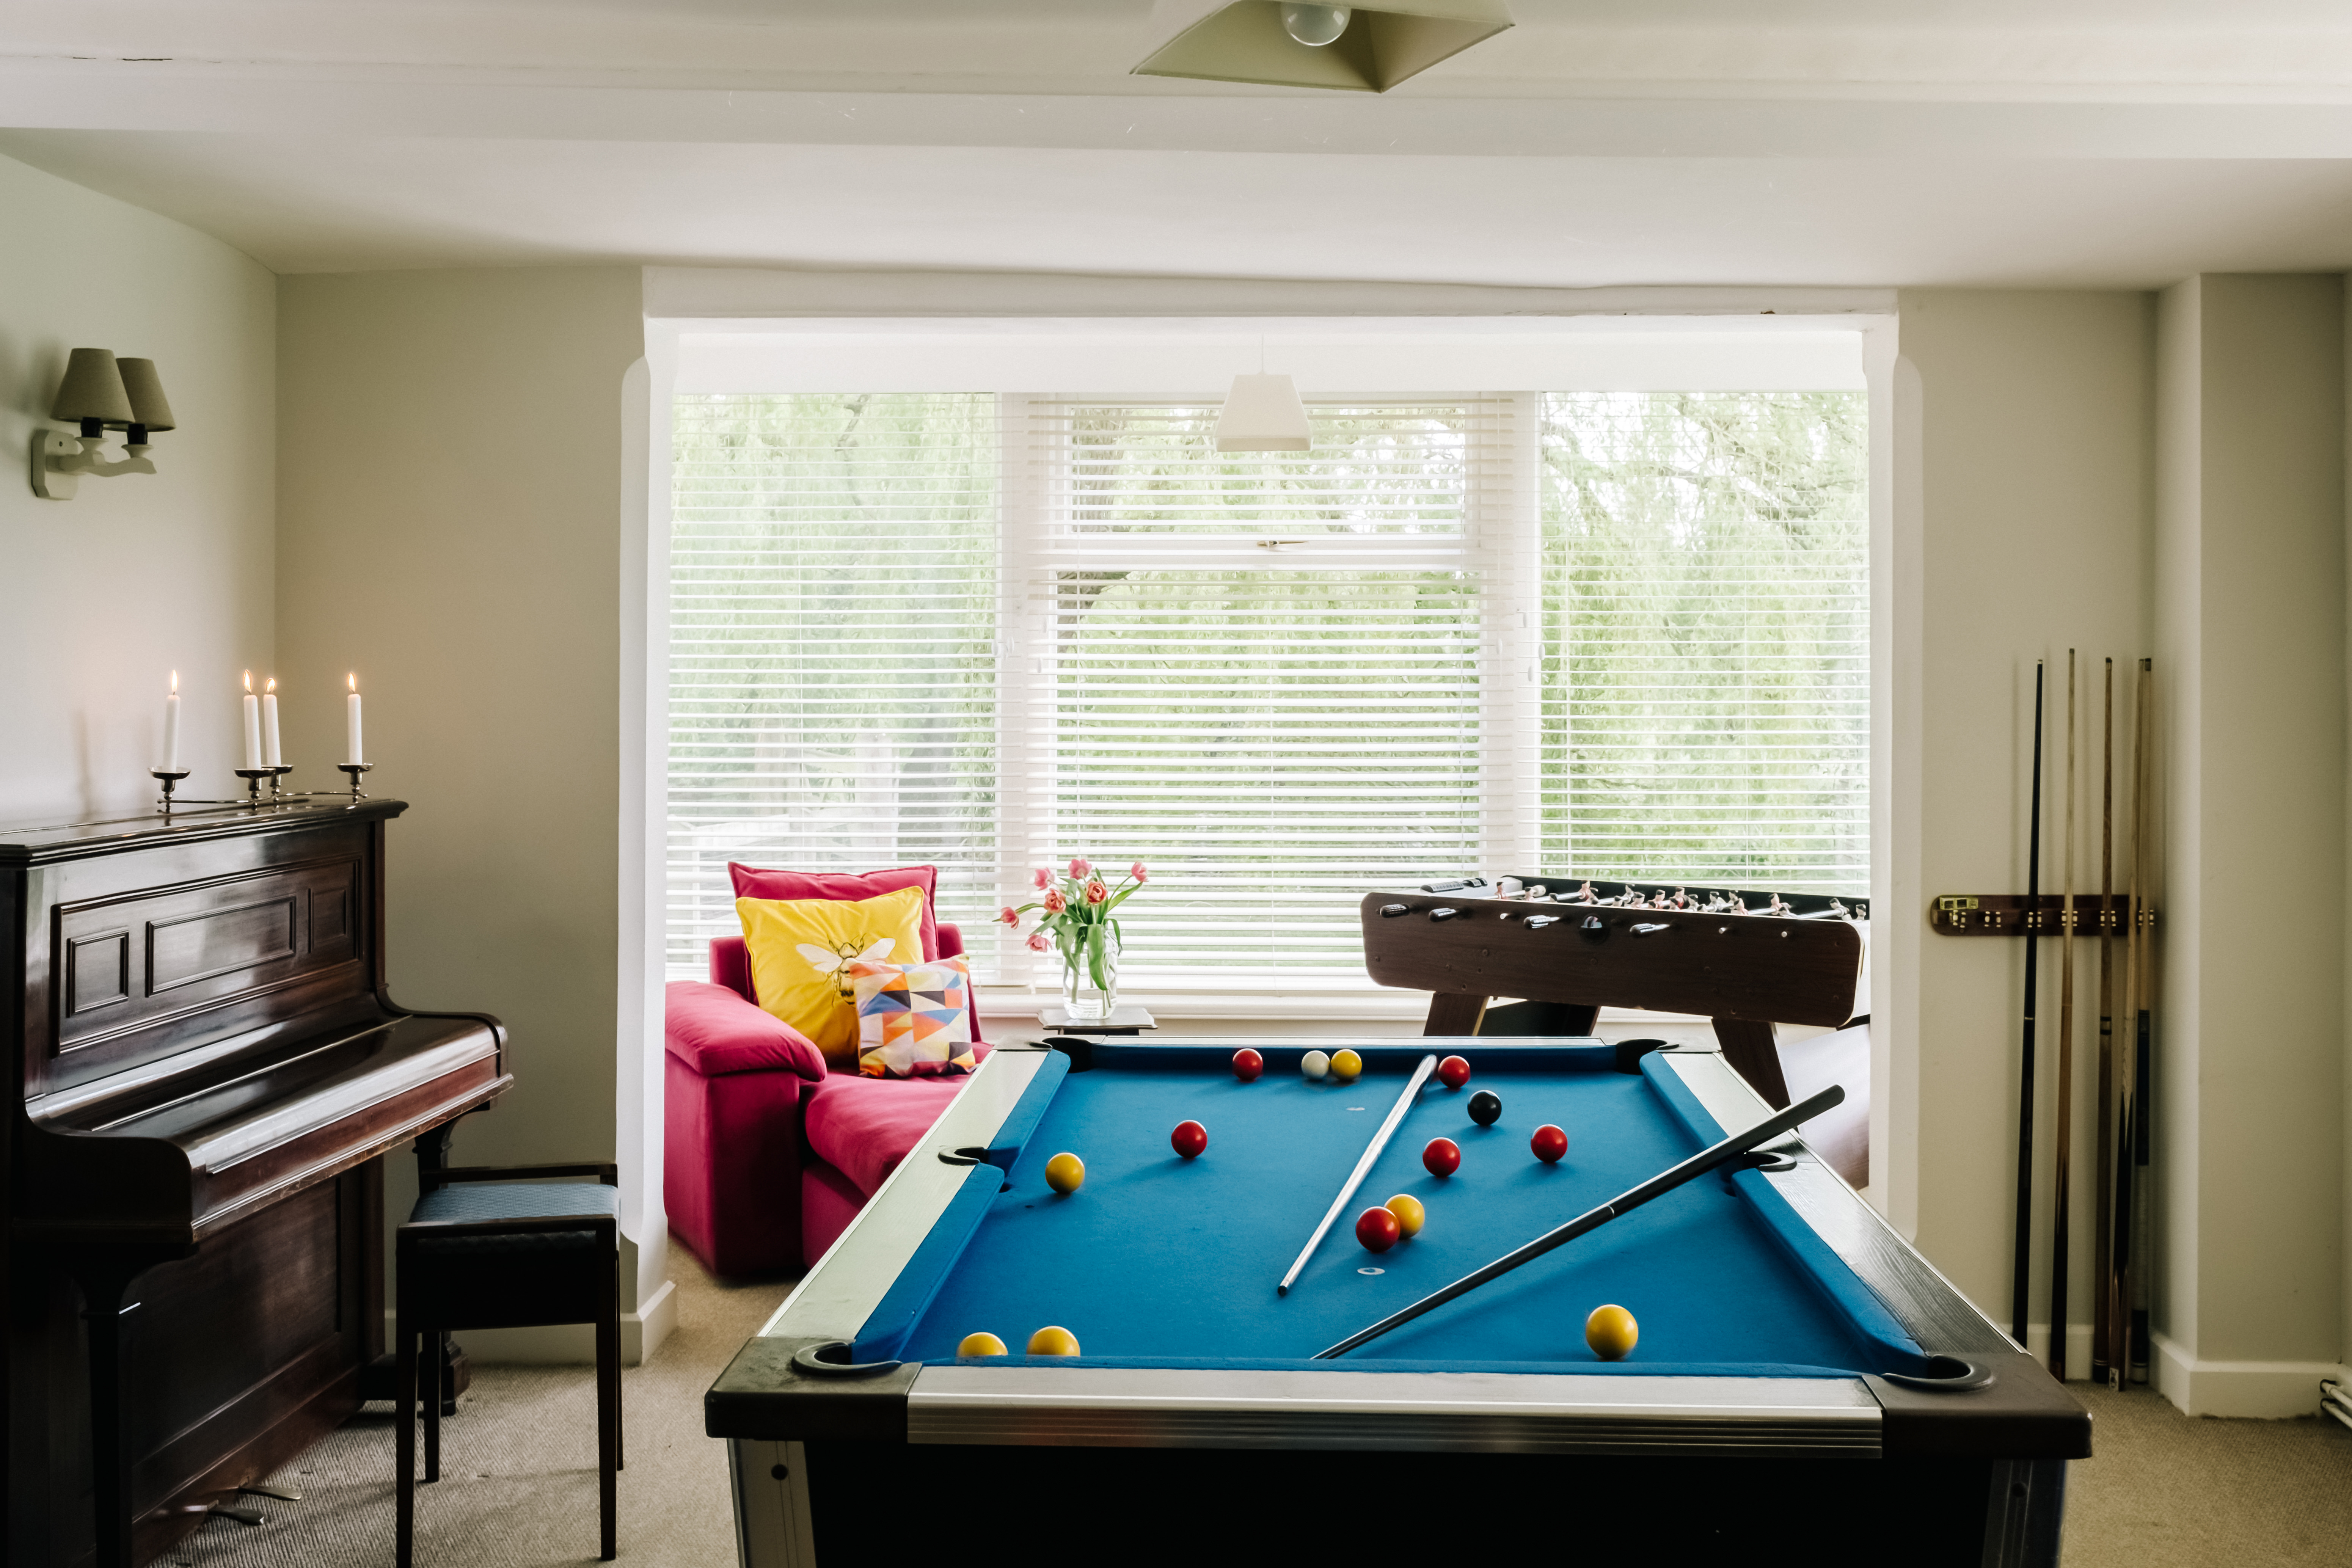 Play the night away in the home's games room